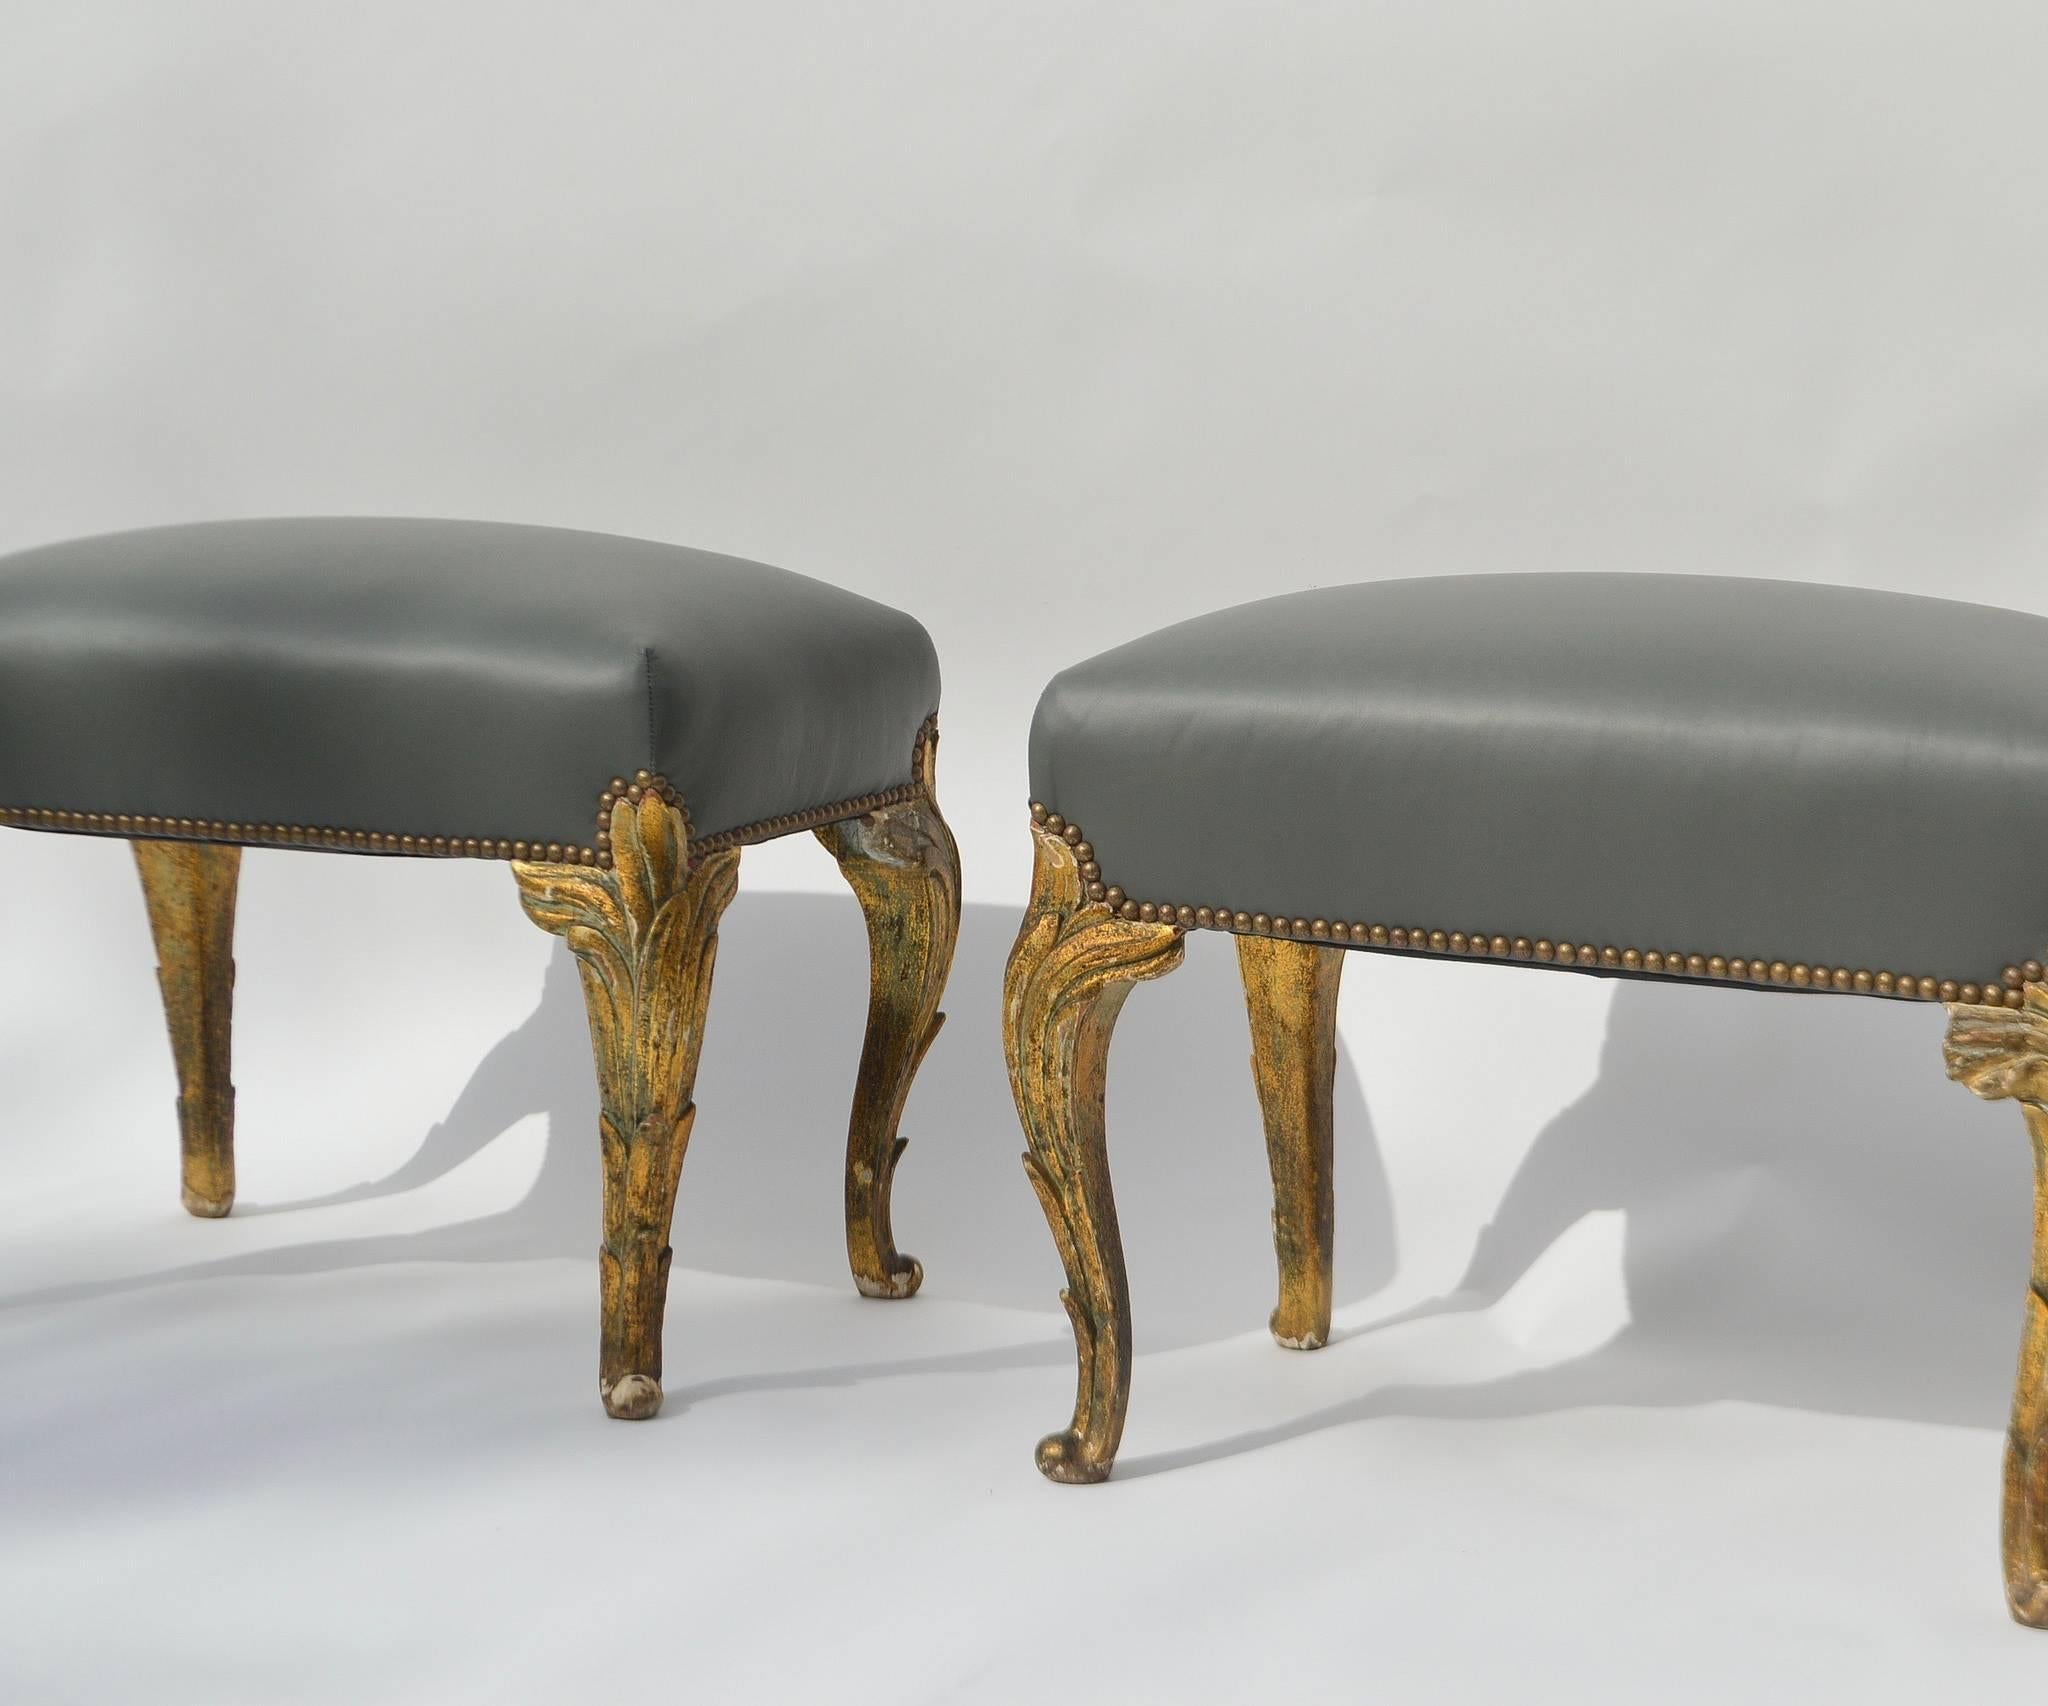 A pair of French Art Nouveau carved gilt wood ottomans newly upholstered in grey leather with nailhead detail.